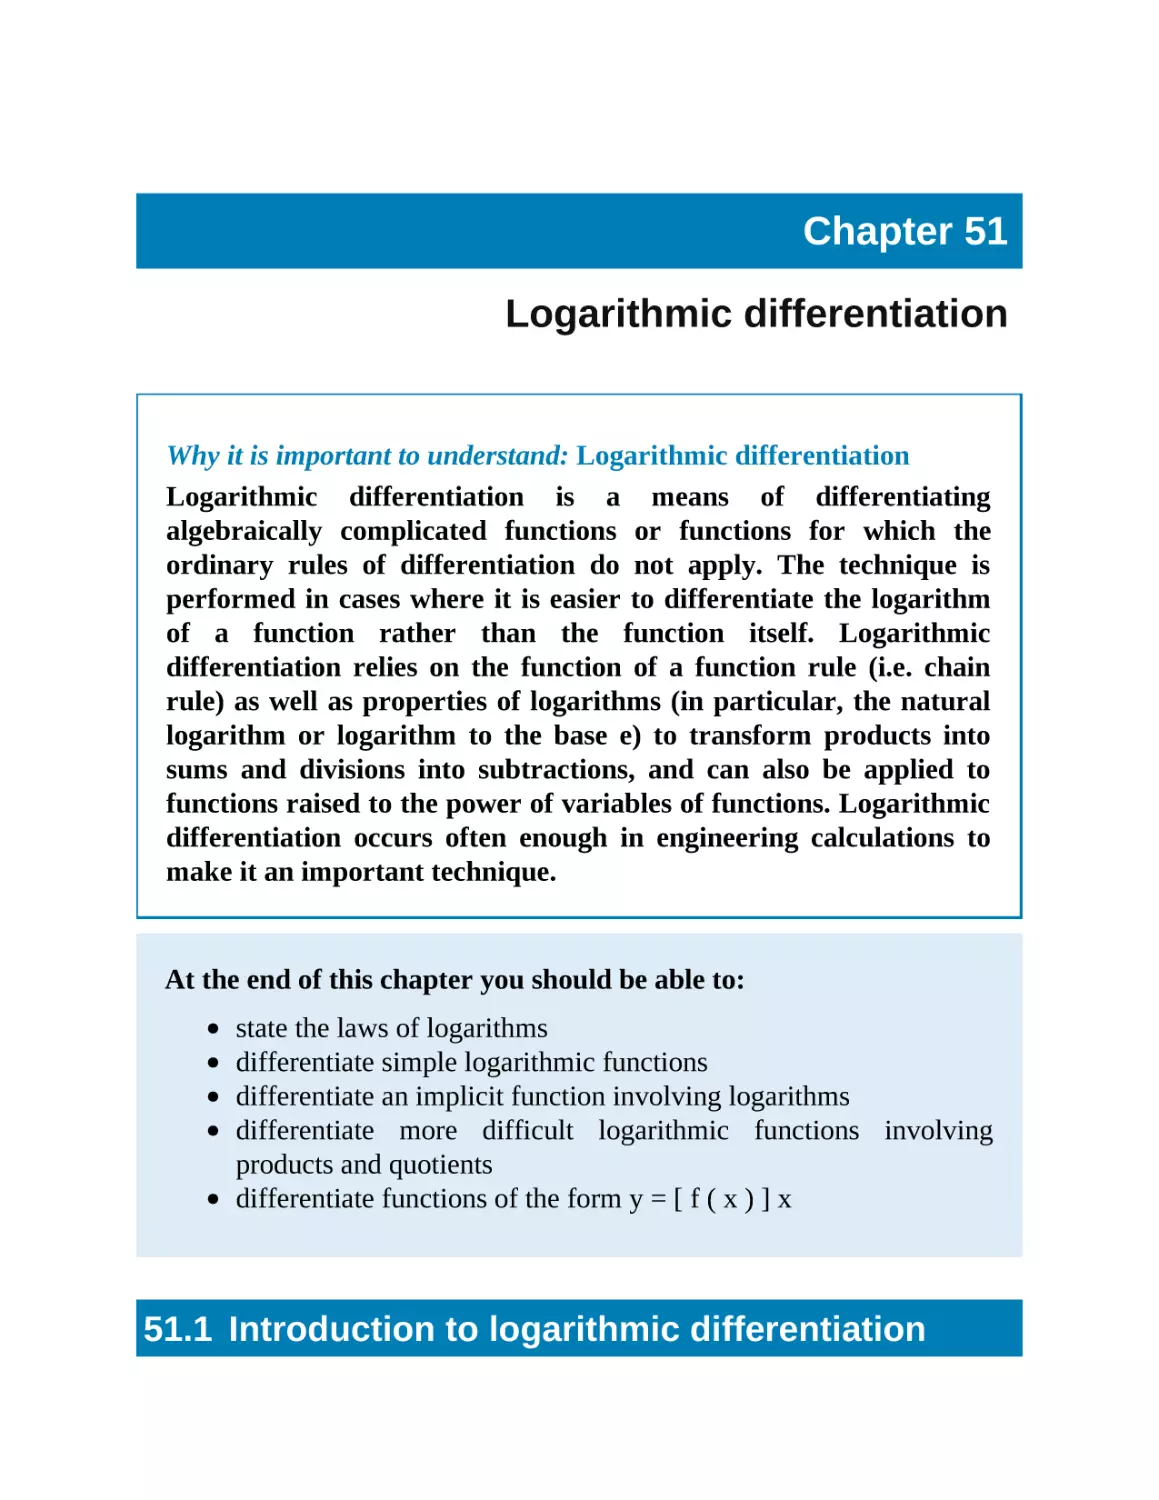 51 Logarithmic differentiation
51.1 Introduction to logarithmic differentiation